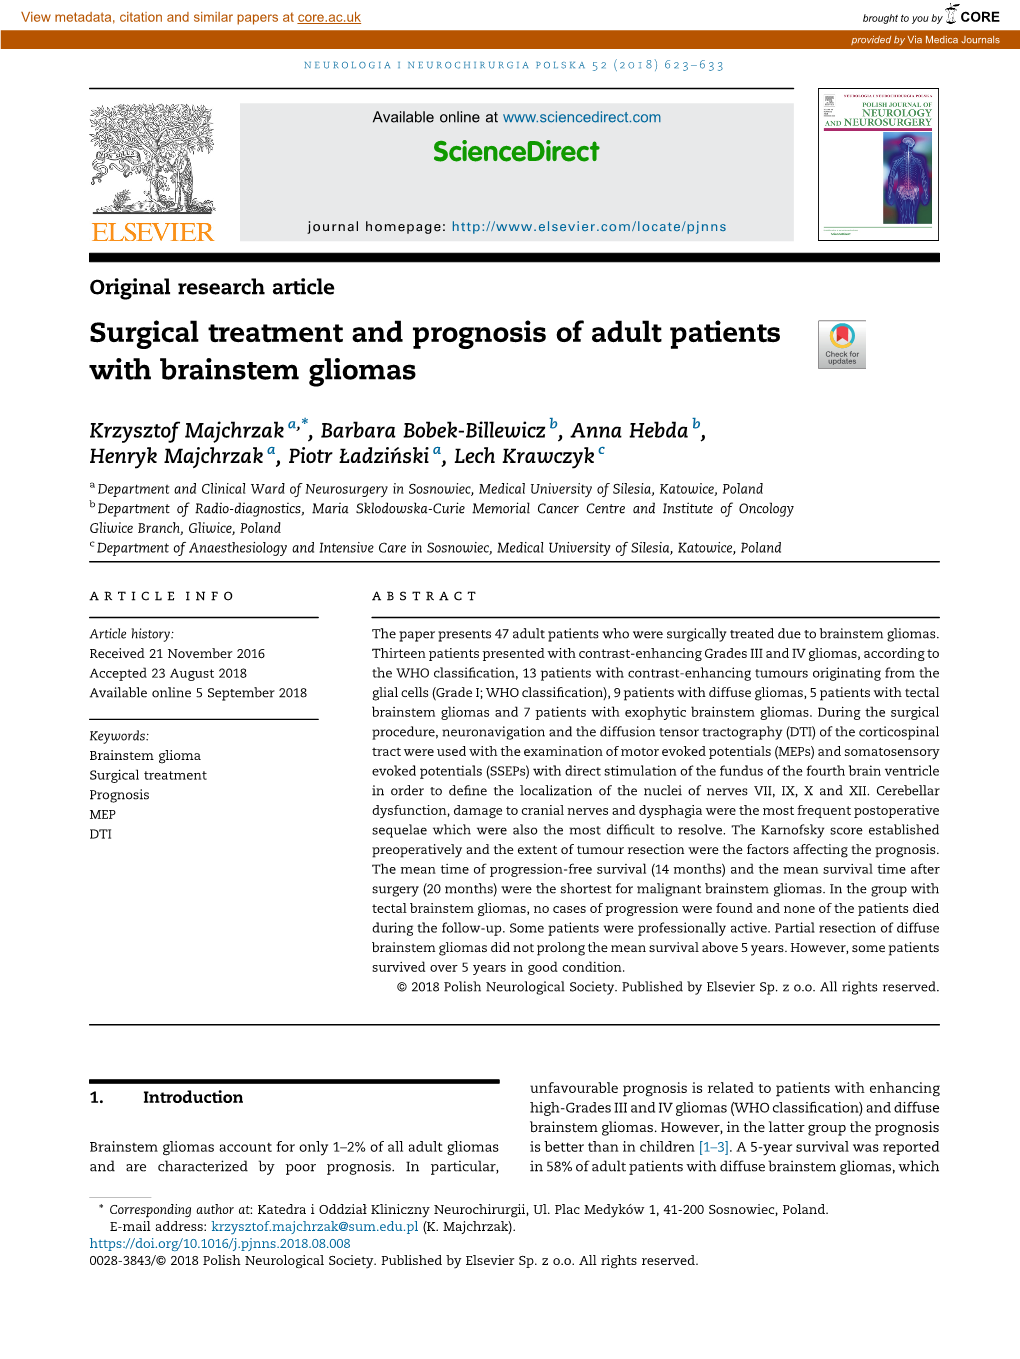 Surgical Treatment and Prognosis of Adult Patients with Brainstem Gliomas